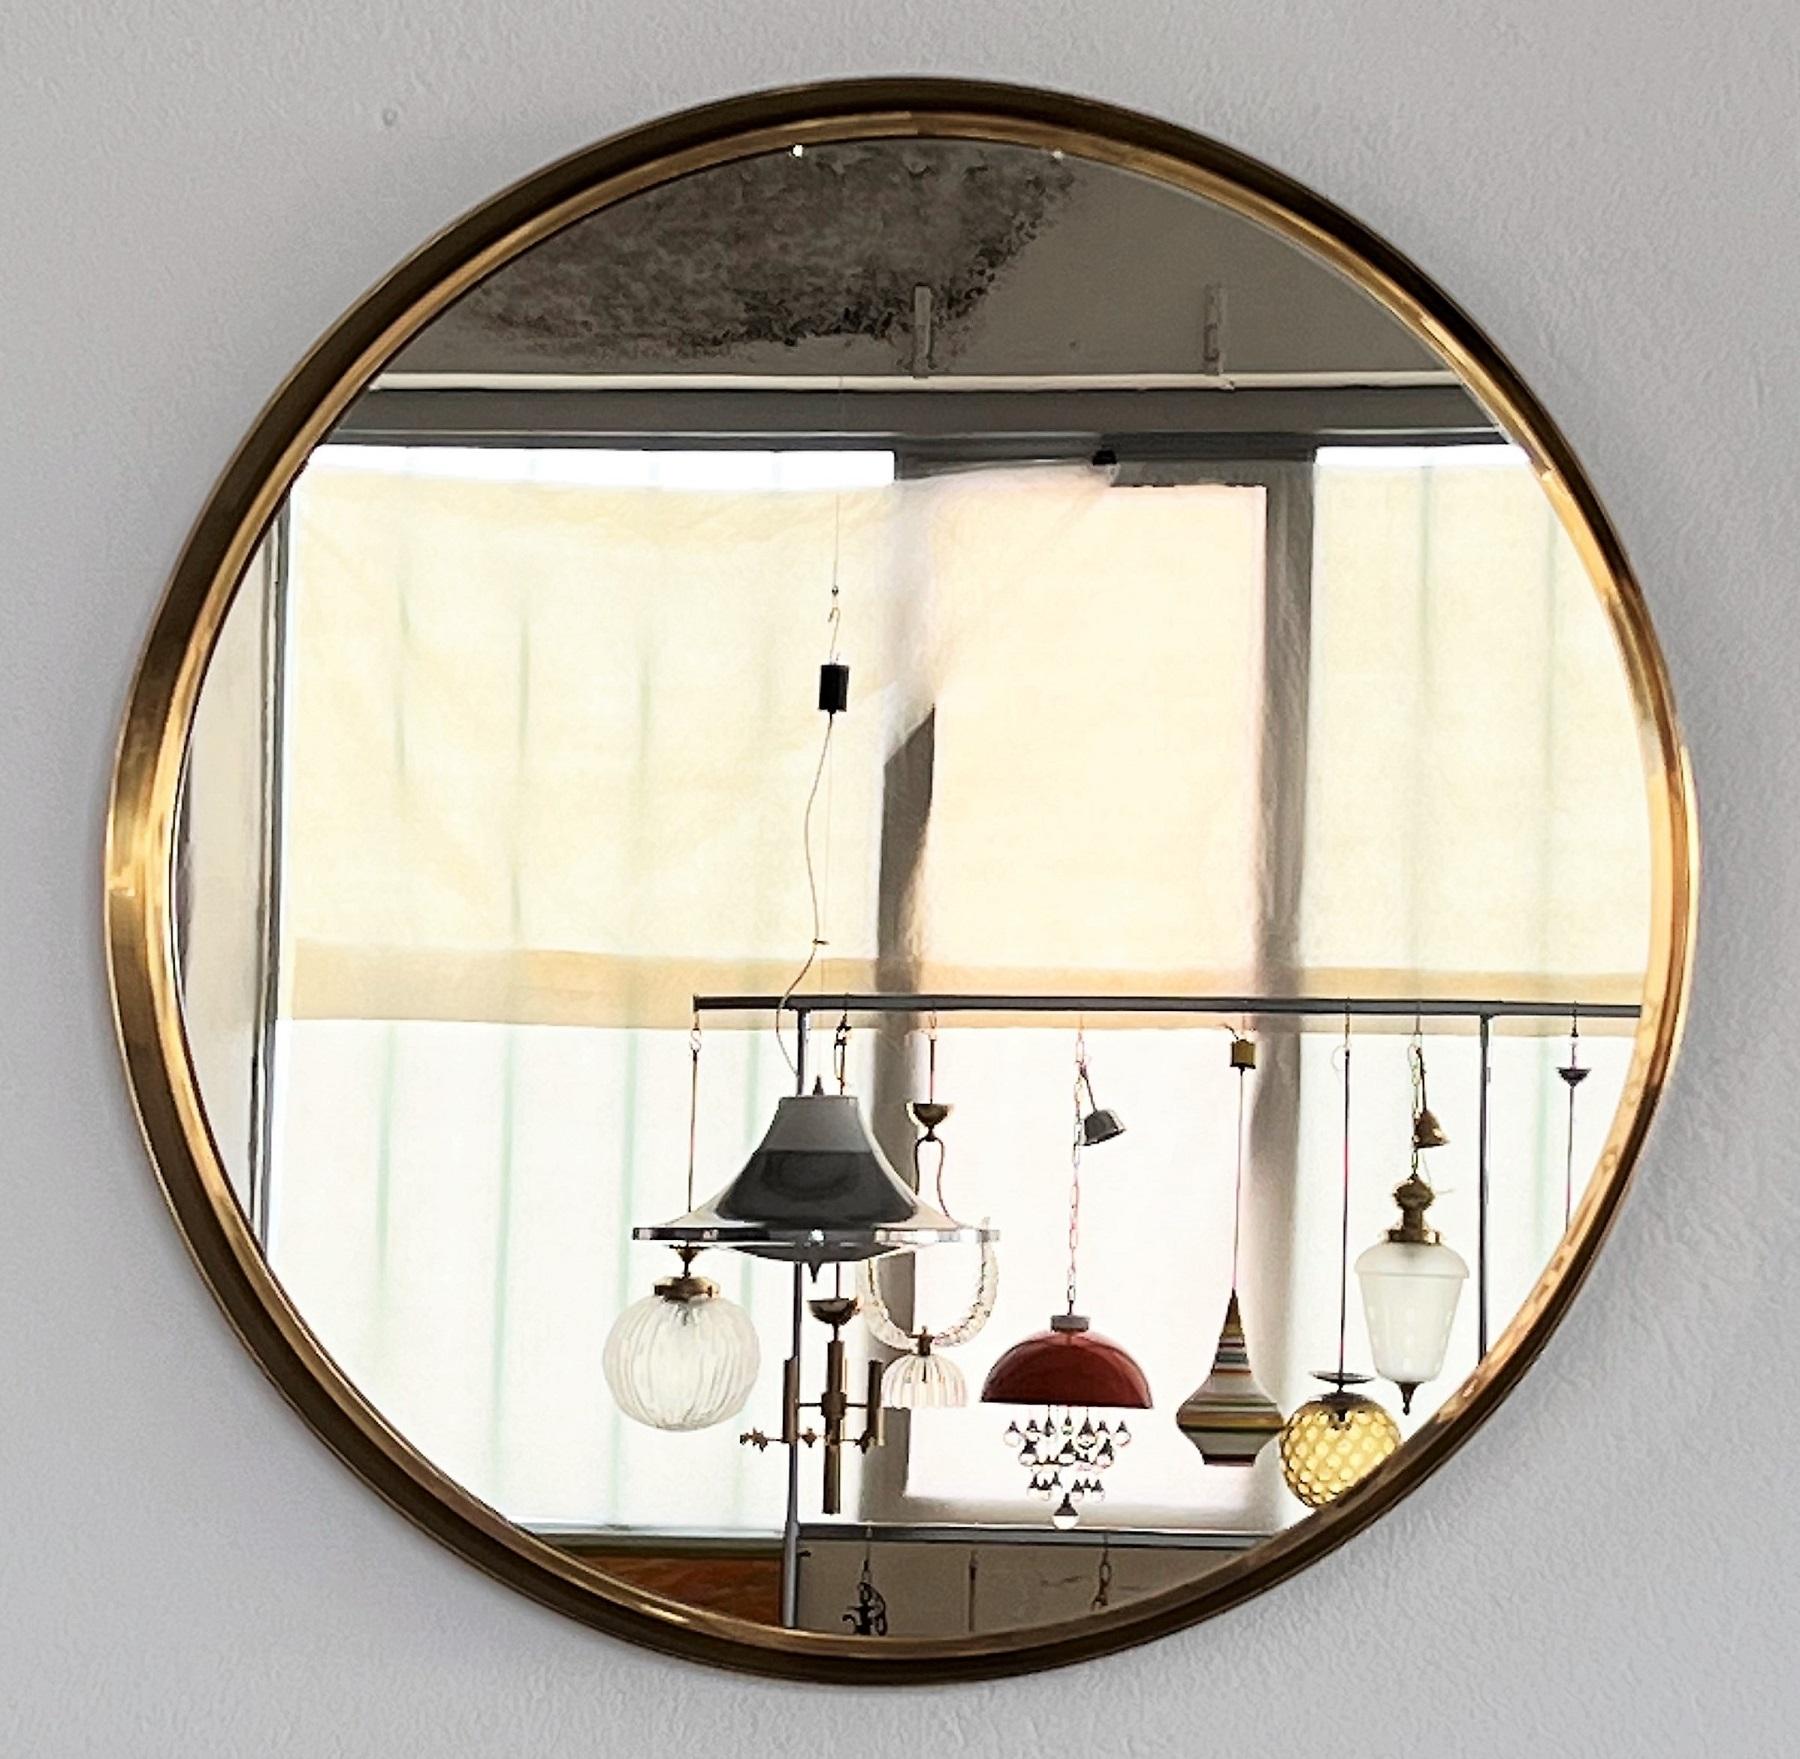 Large round luxury wall mirror made of a full brass frame with typical gold plating and crystal glass mirror.
Made by Vereinigte Werkstätten München, Germany, in the 1960s.
This big mirror is in the original condition, made of excellent